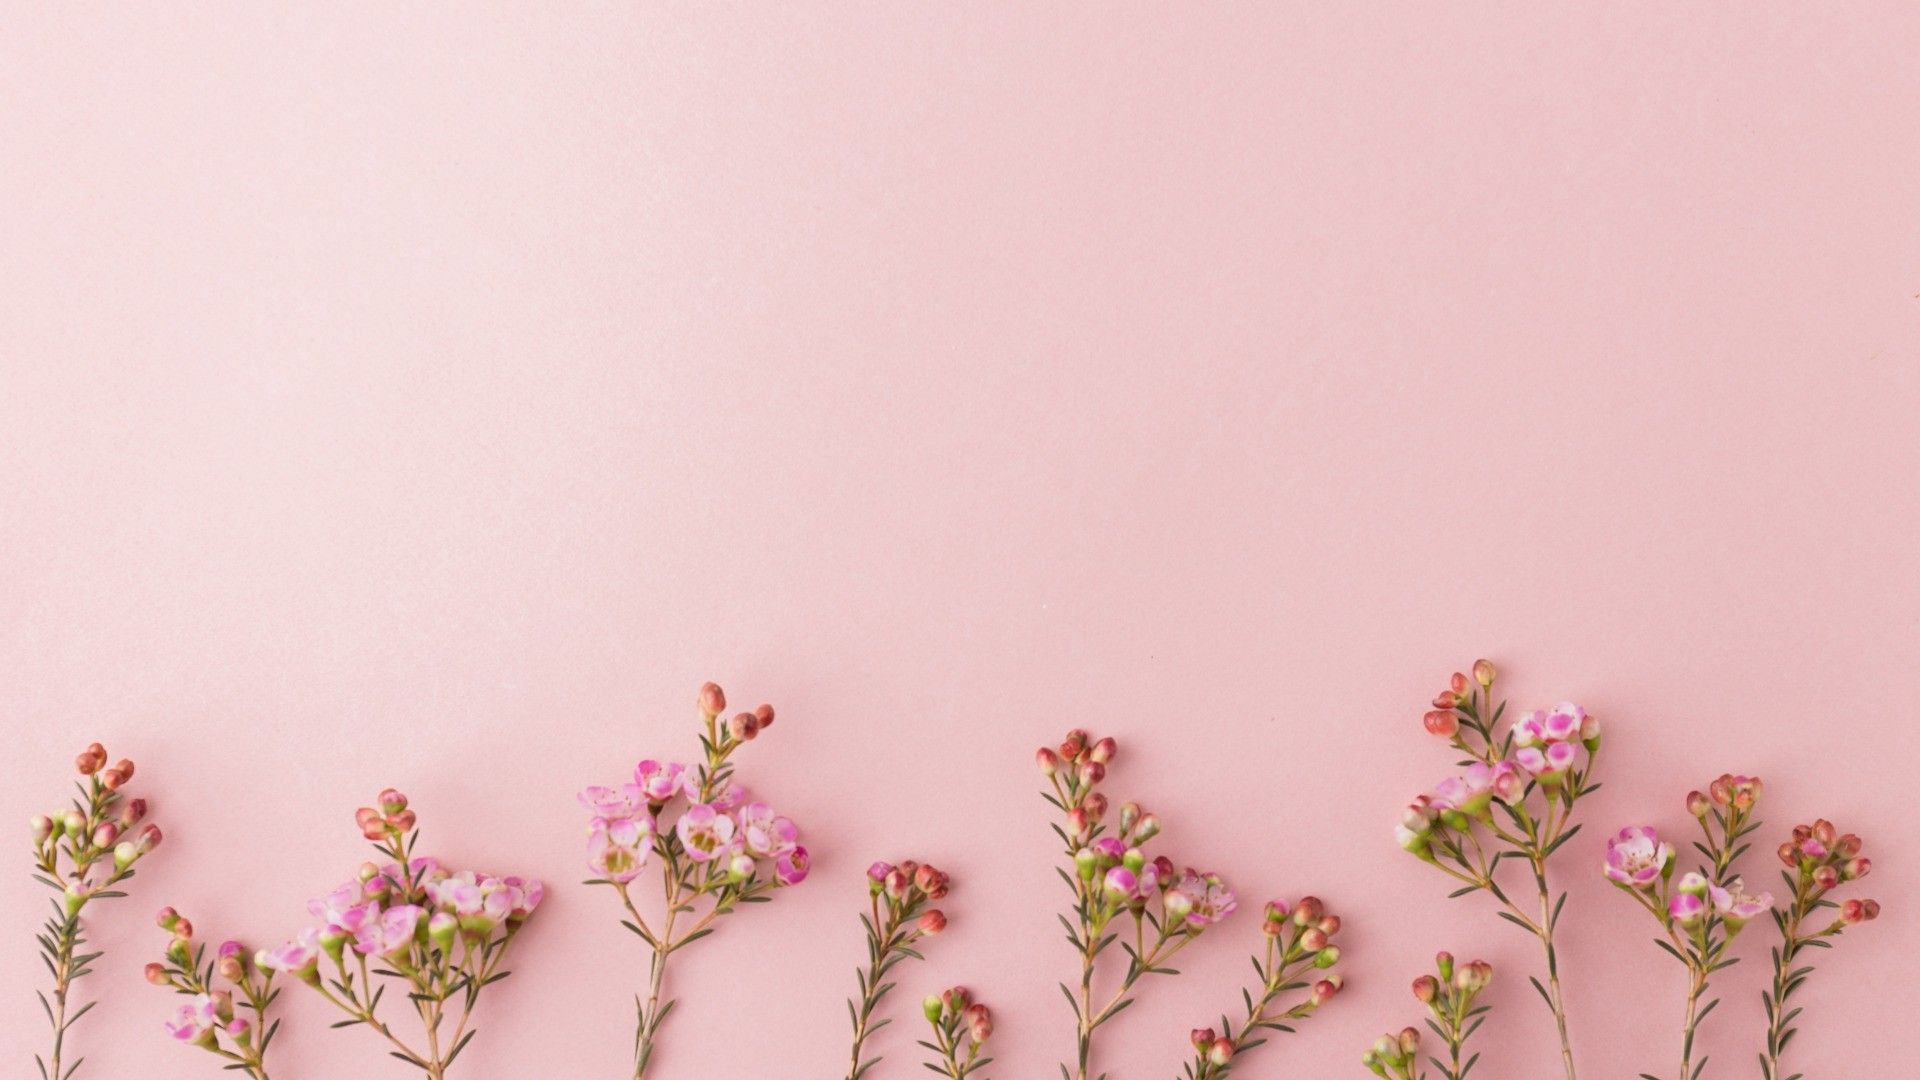 A group of flowers on pink background - Rose gold